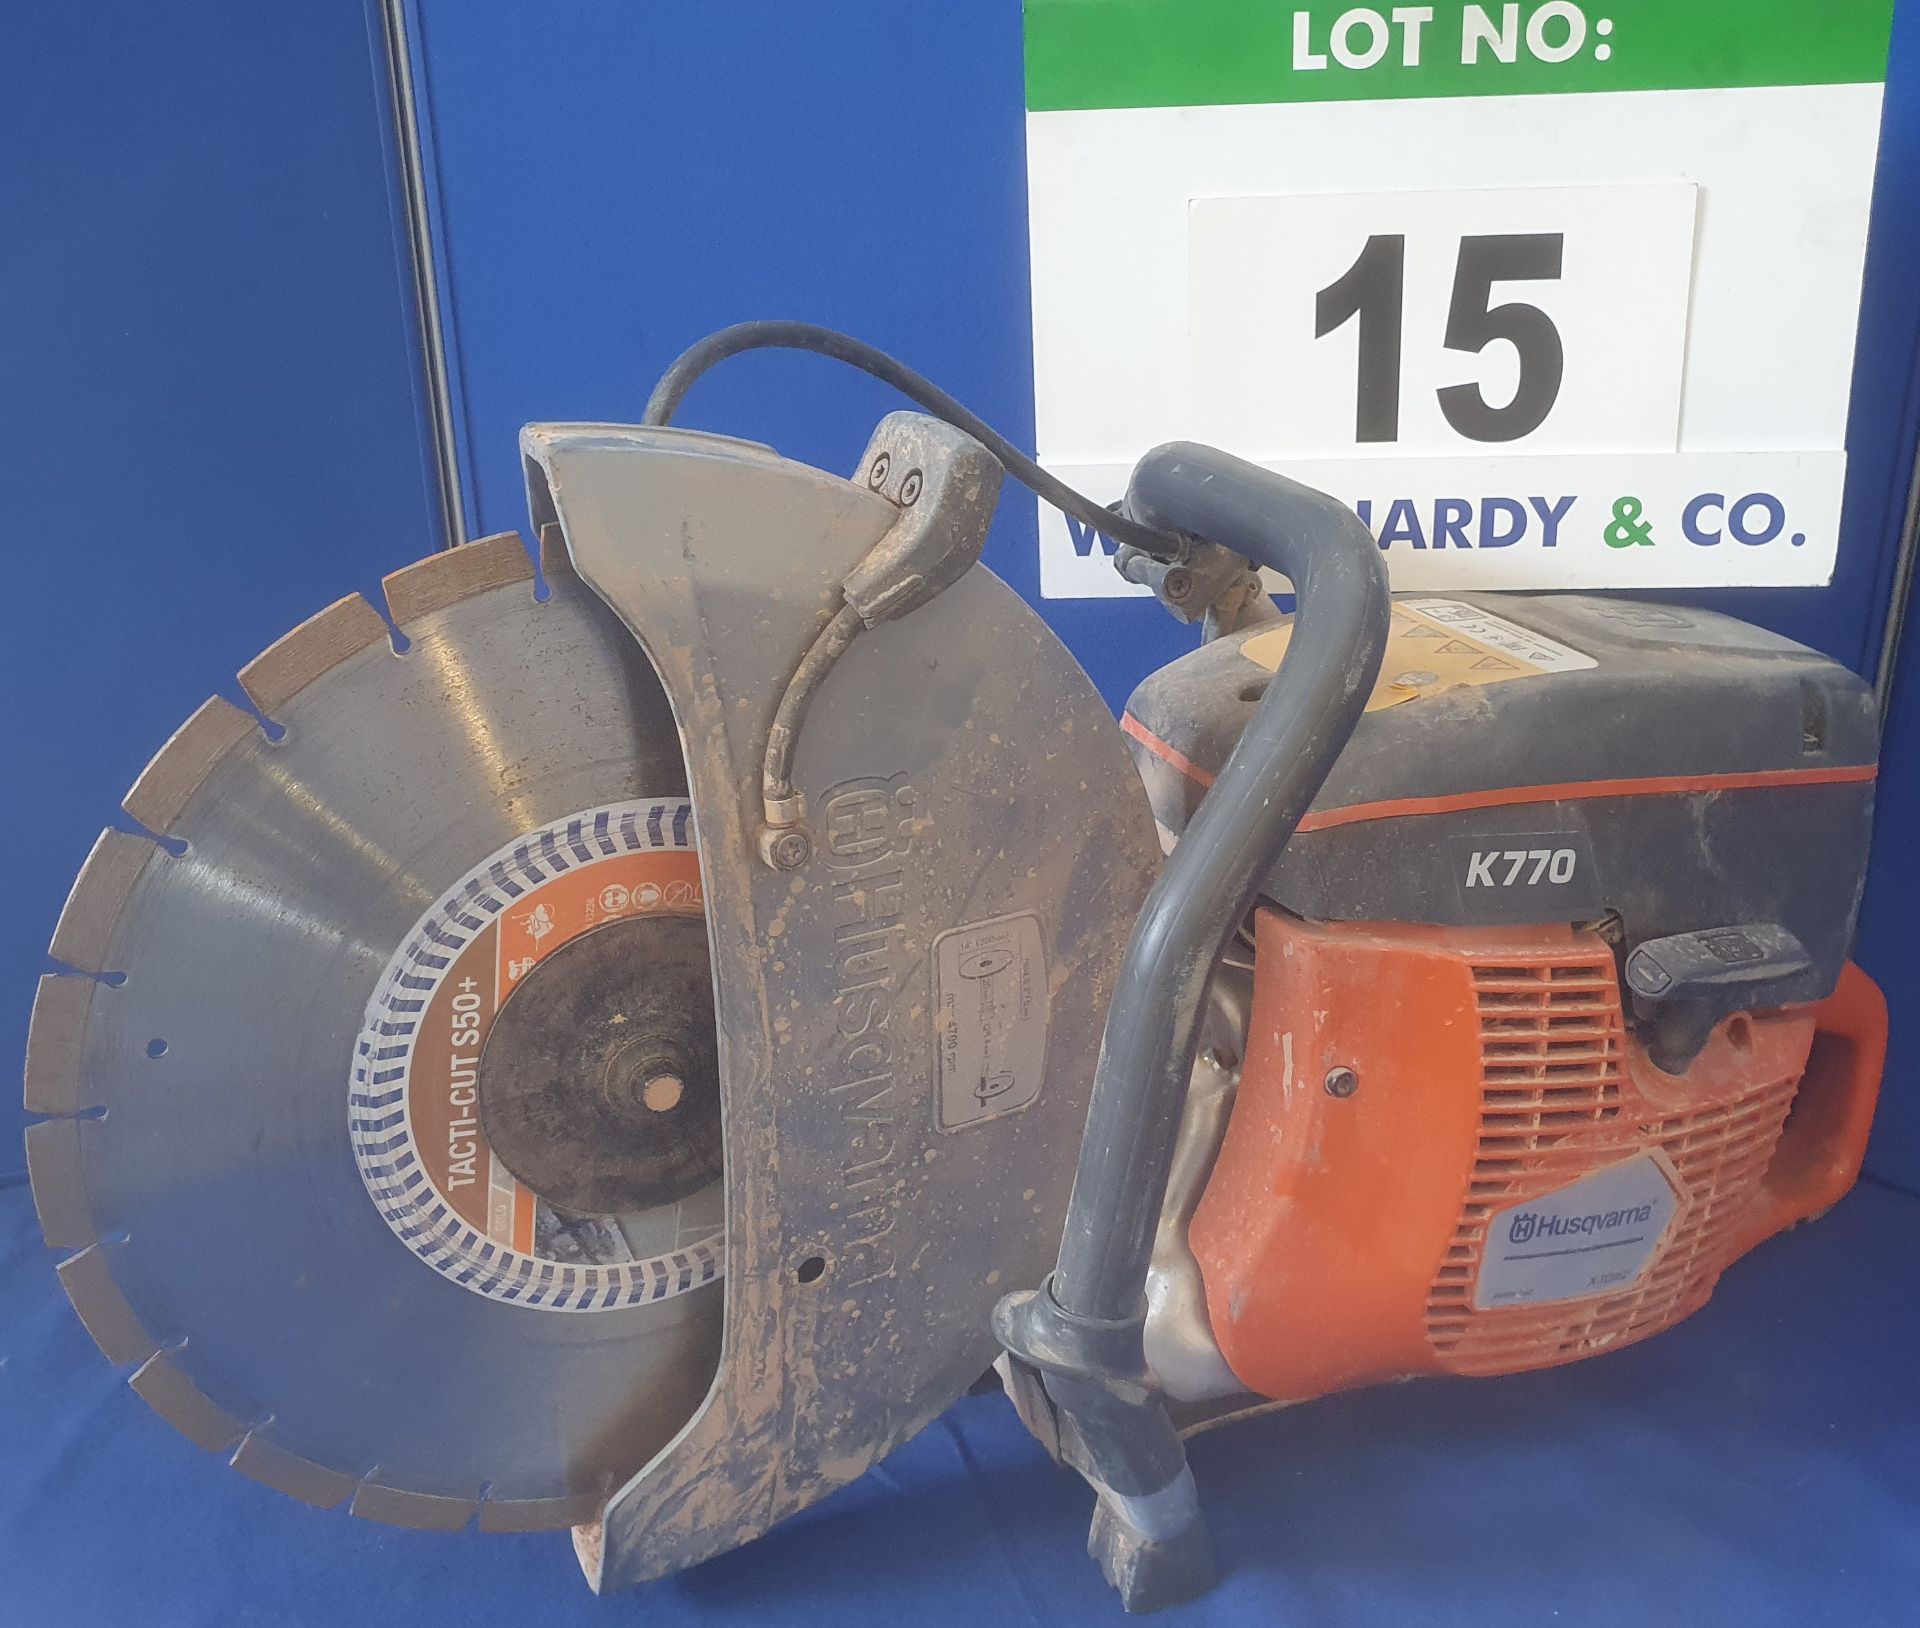 A HUSQVARNA K770 350mm Petrol Powered Hand Held Disc Cutter with Manual, Seven Bottles of 2-T Oil